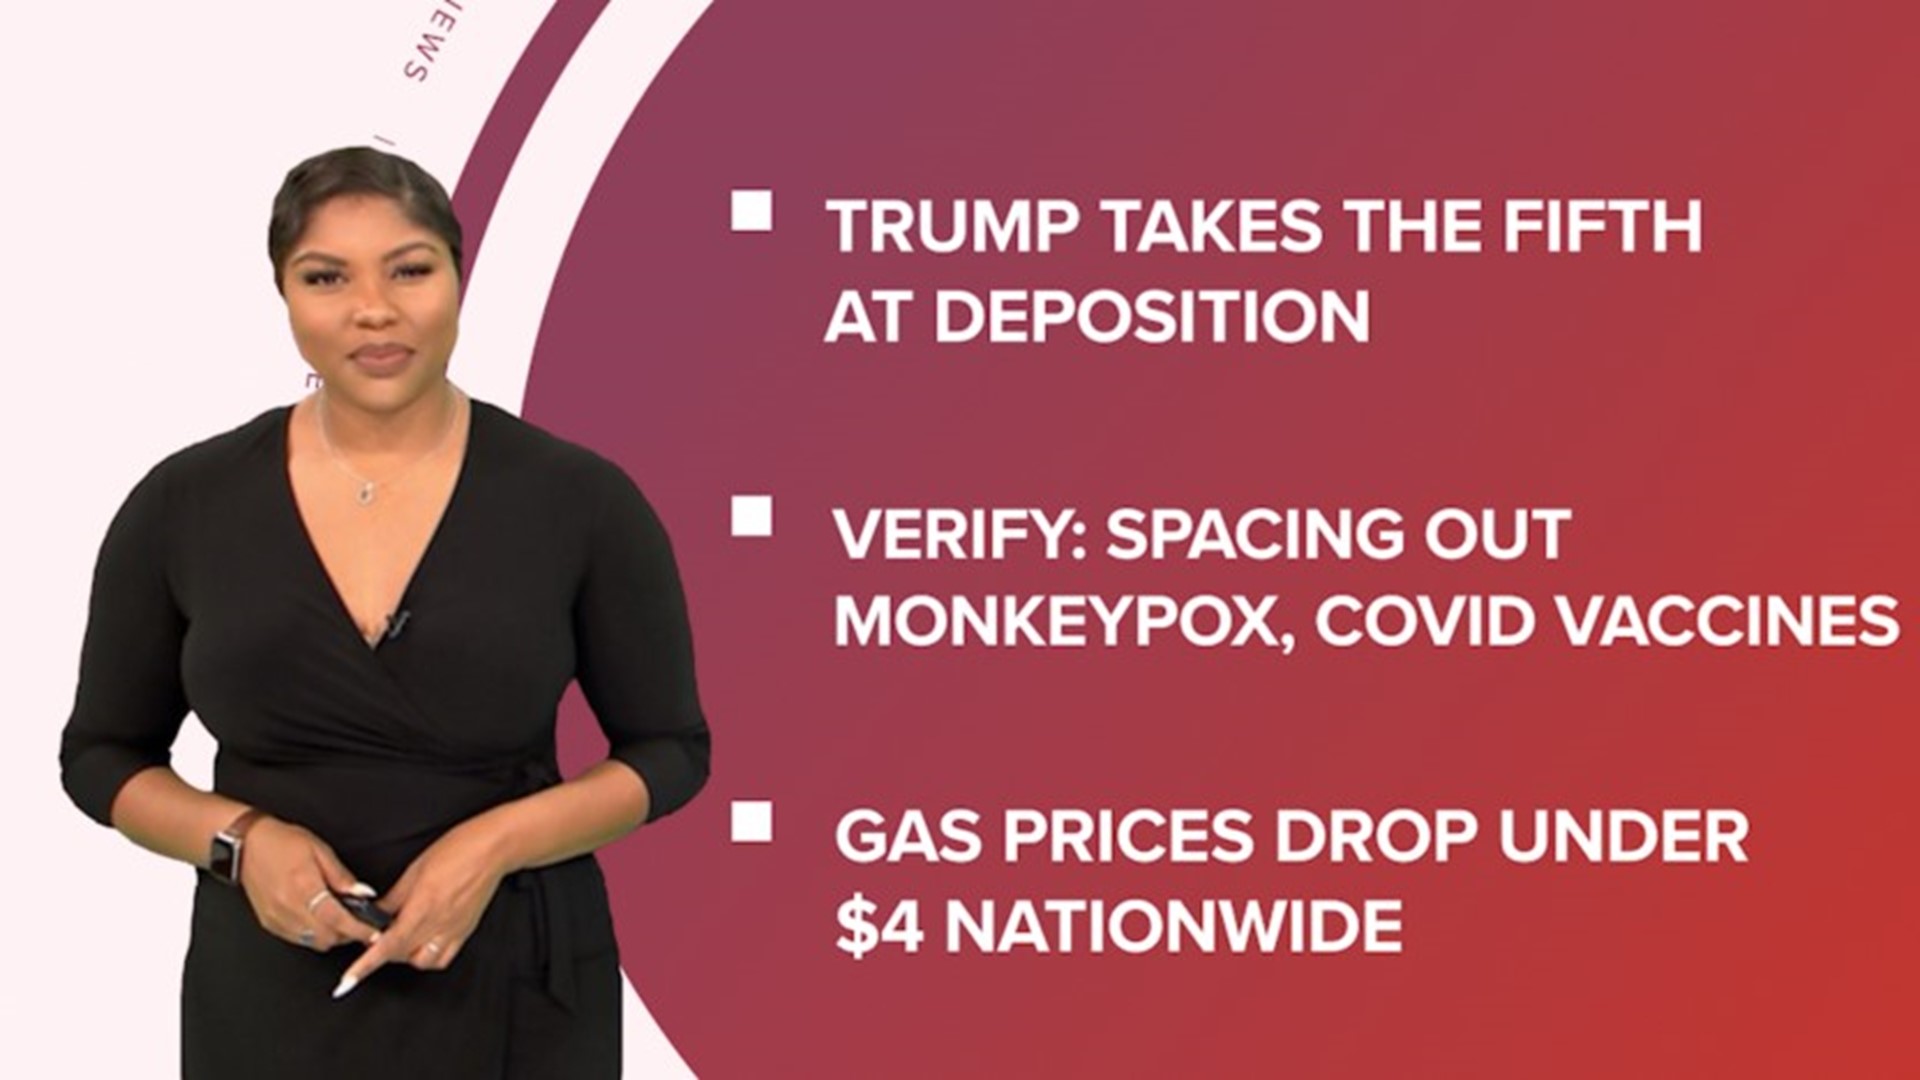 A look at what is happening in the news from Donald Trump pleading the fifth in deposition to gas prices dropping under $4 and preparing for back to school.